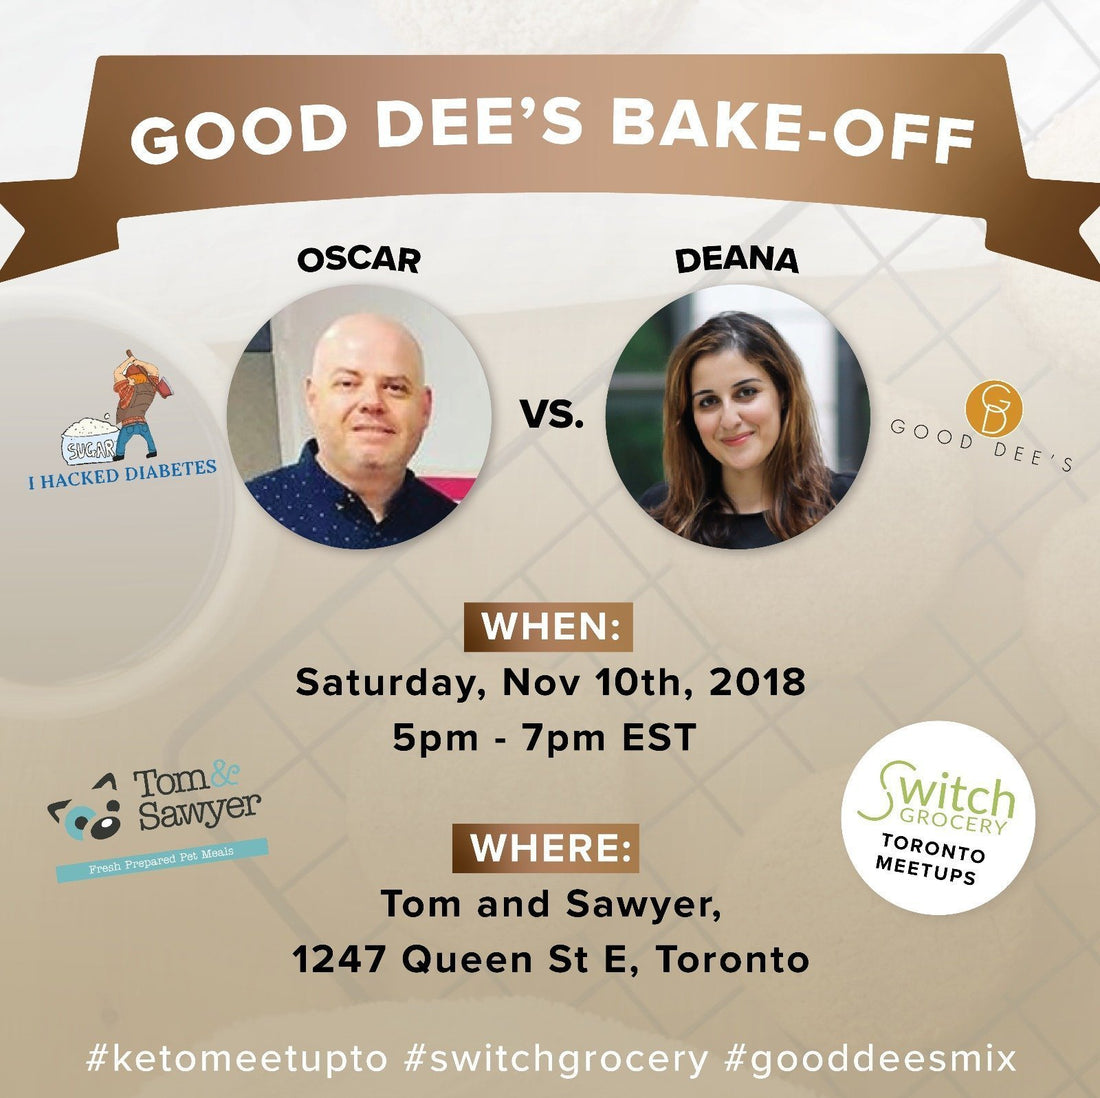 Good Dee's low carb keto bake off with Oscar of I Hacked Diabetes and Deana at Switch Grocery and Tom and Sawyer pet meals